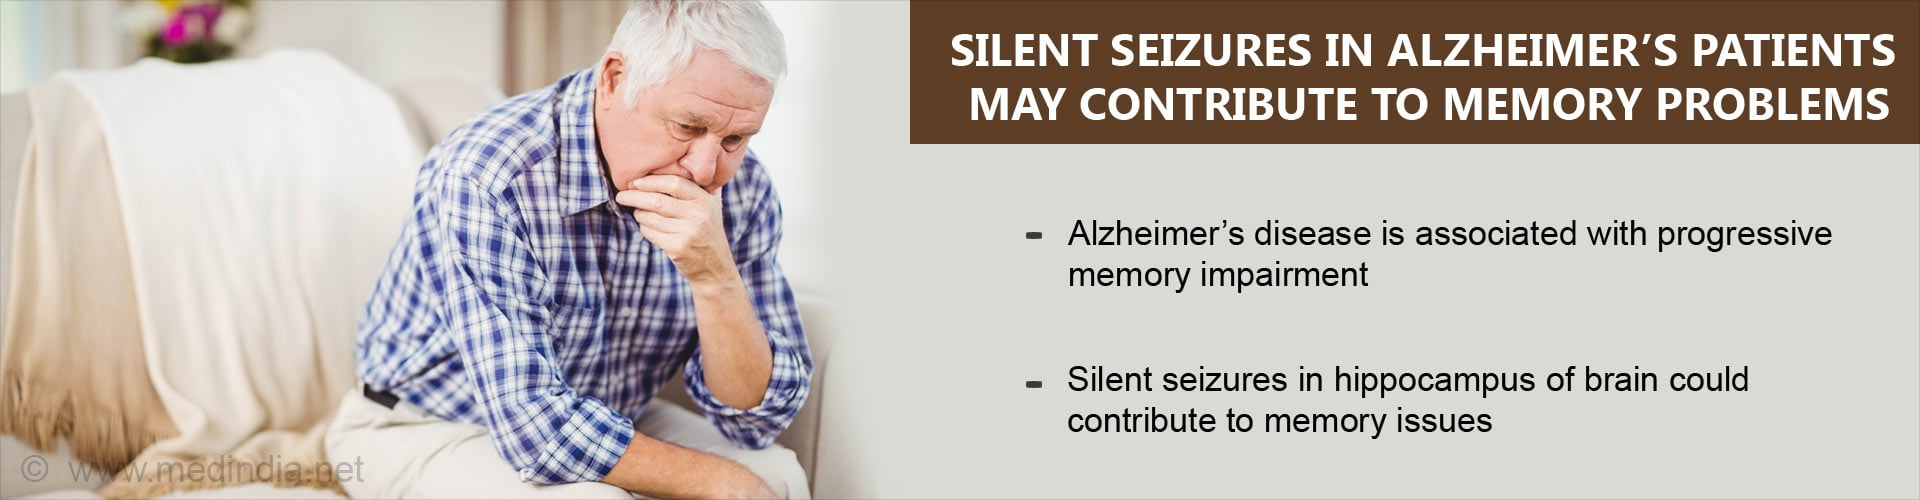 Silent seizures in Alzheimer''s patients may contribute to memory problems
- Alzheimer''s disease is associated with progressive memory impairment
- Silent seizures in hippocampus of brain could contribute to memory issues
